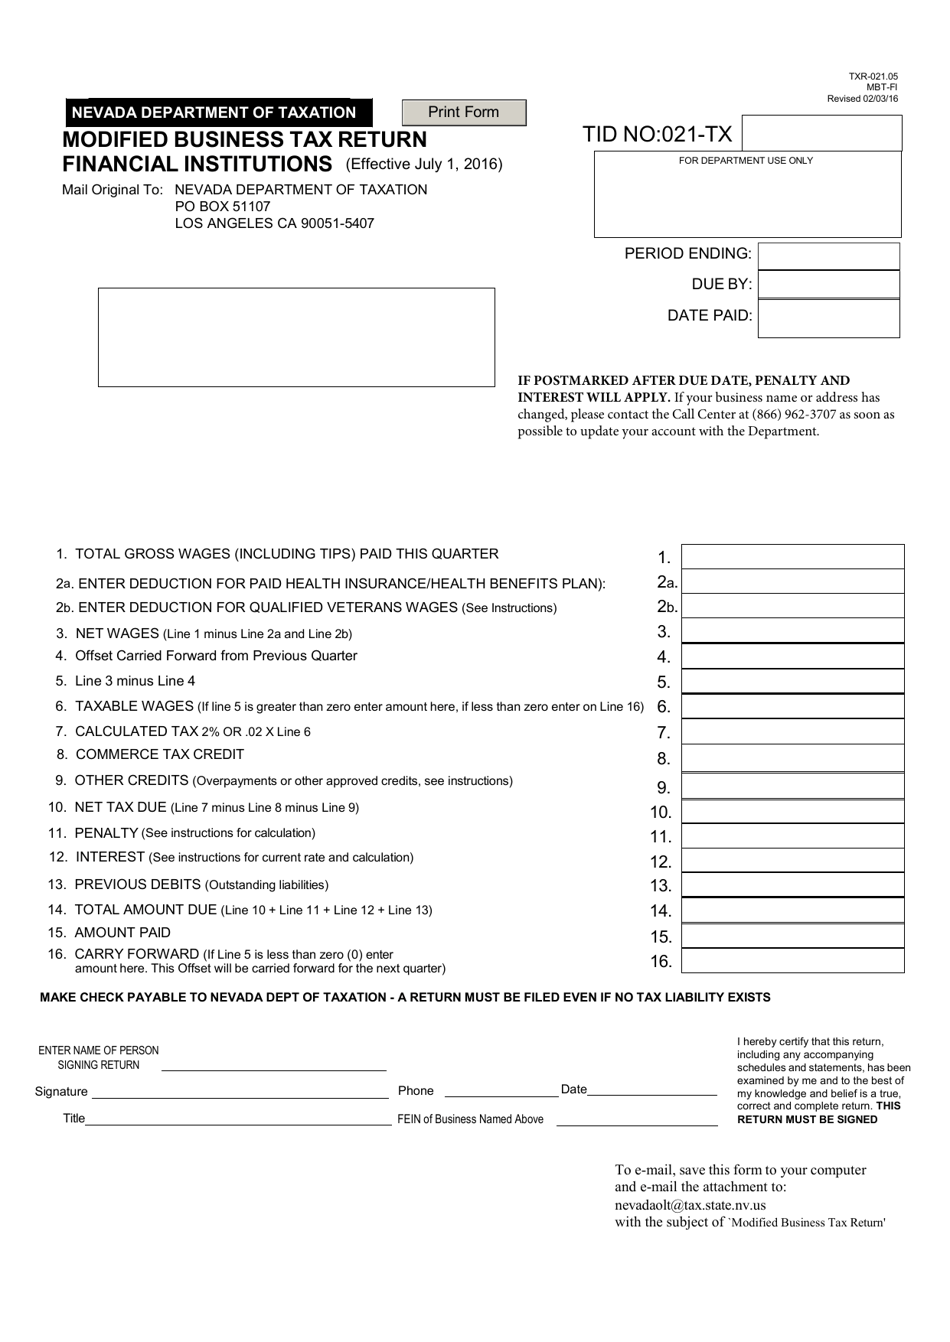 Form TXR-021.05 Modified Business Tax Return - Financial Institutions - Nevada, Page 1